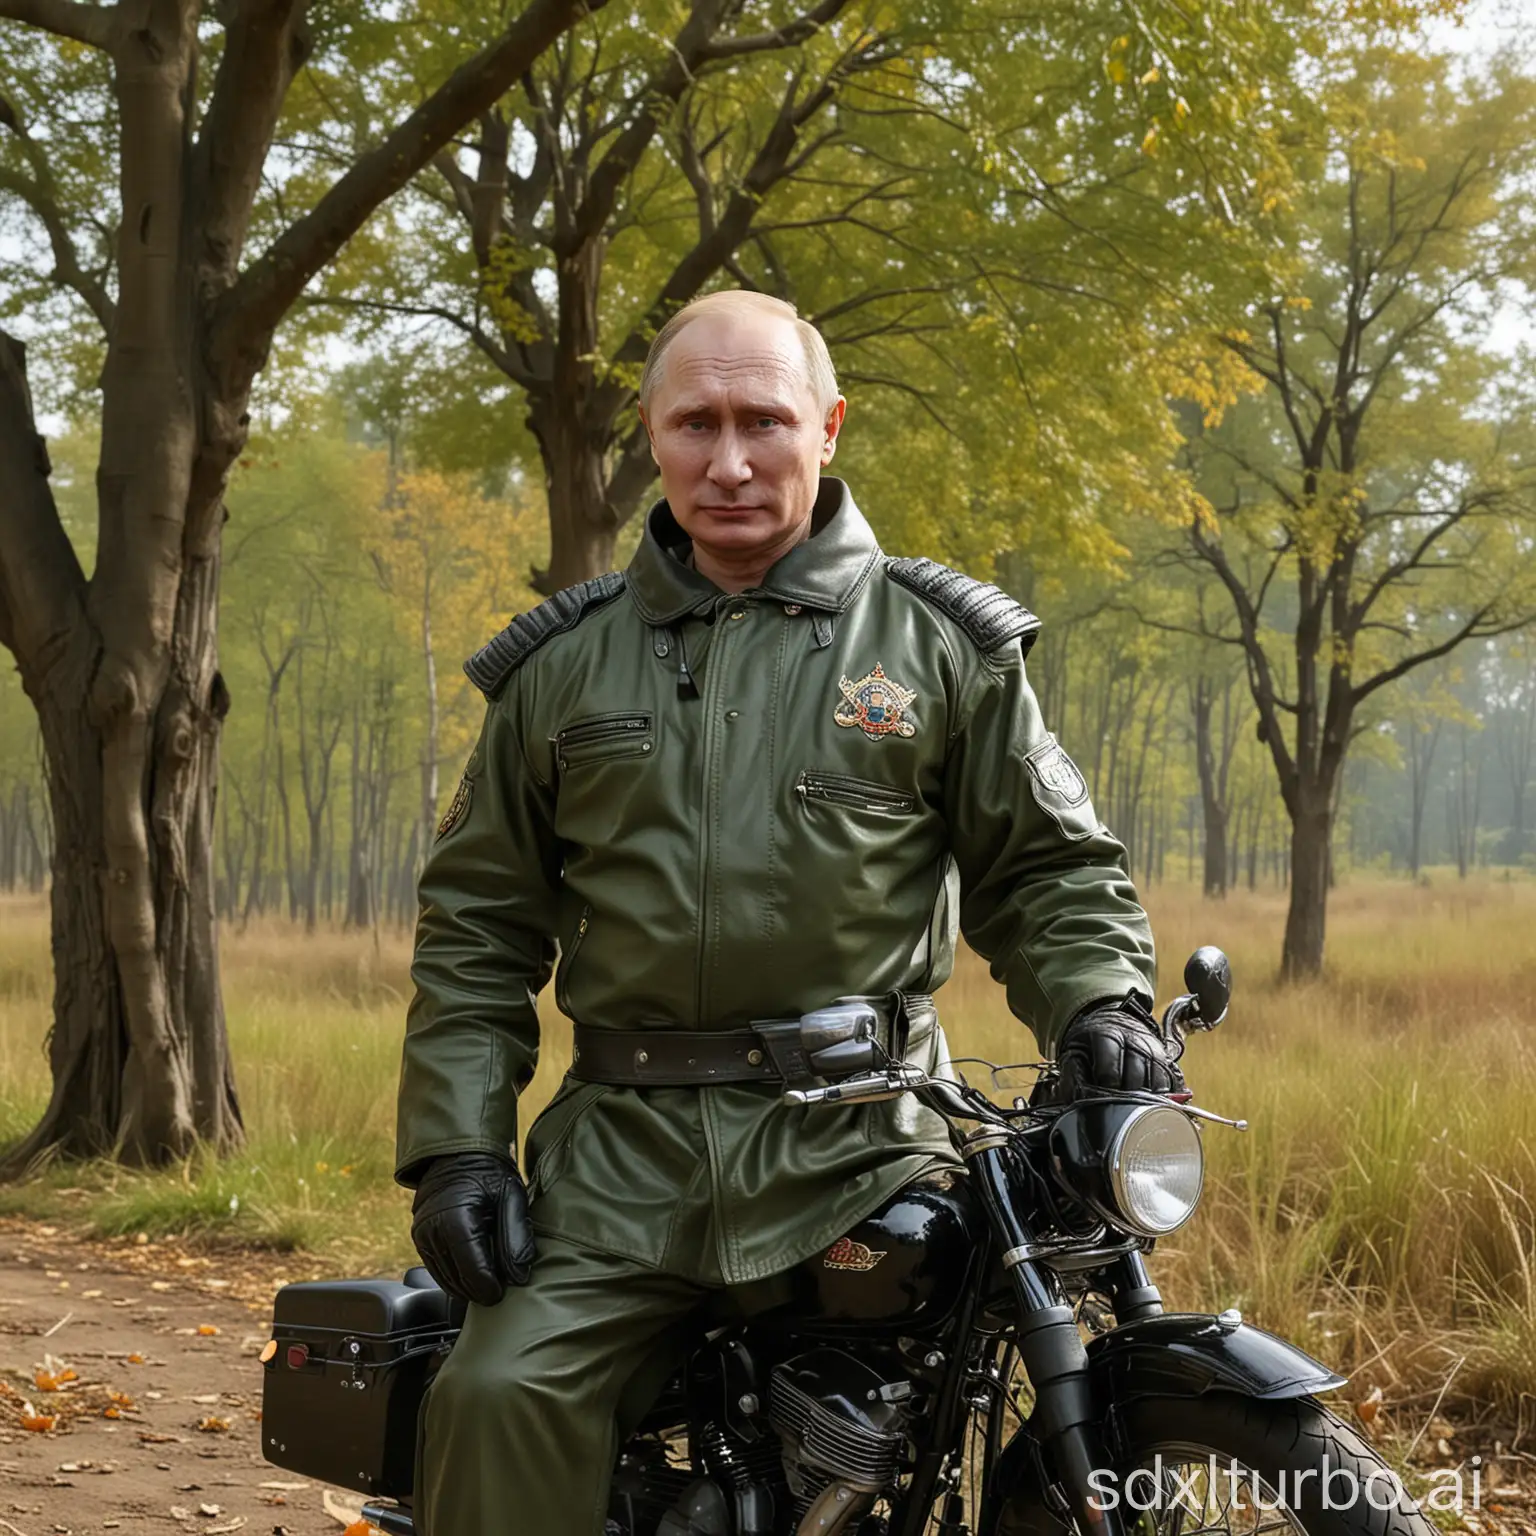 ultradetailed, uplooking view ,65 years old real face putin , real look hand leather glove, wear Taekwondo robe，ride superlong harley davision light green motorcycle , half hill grassland block by a huge taller durain tree, autumn, cloudy,